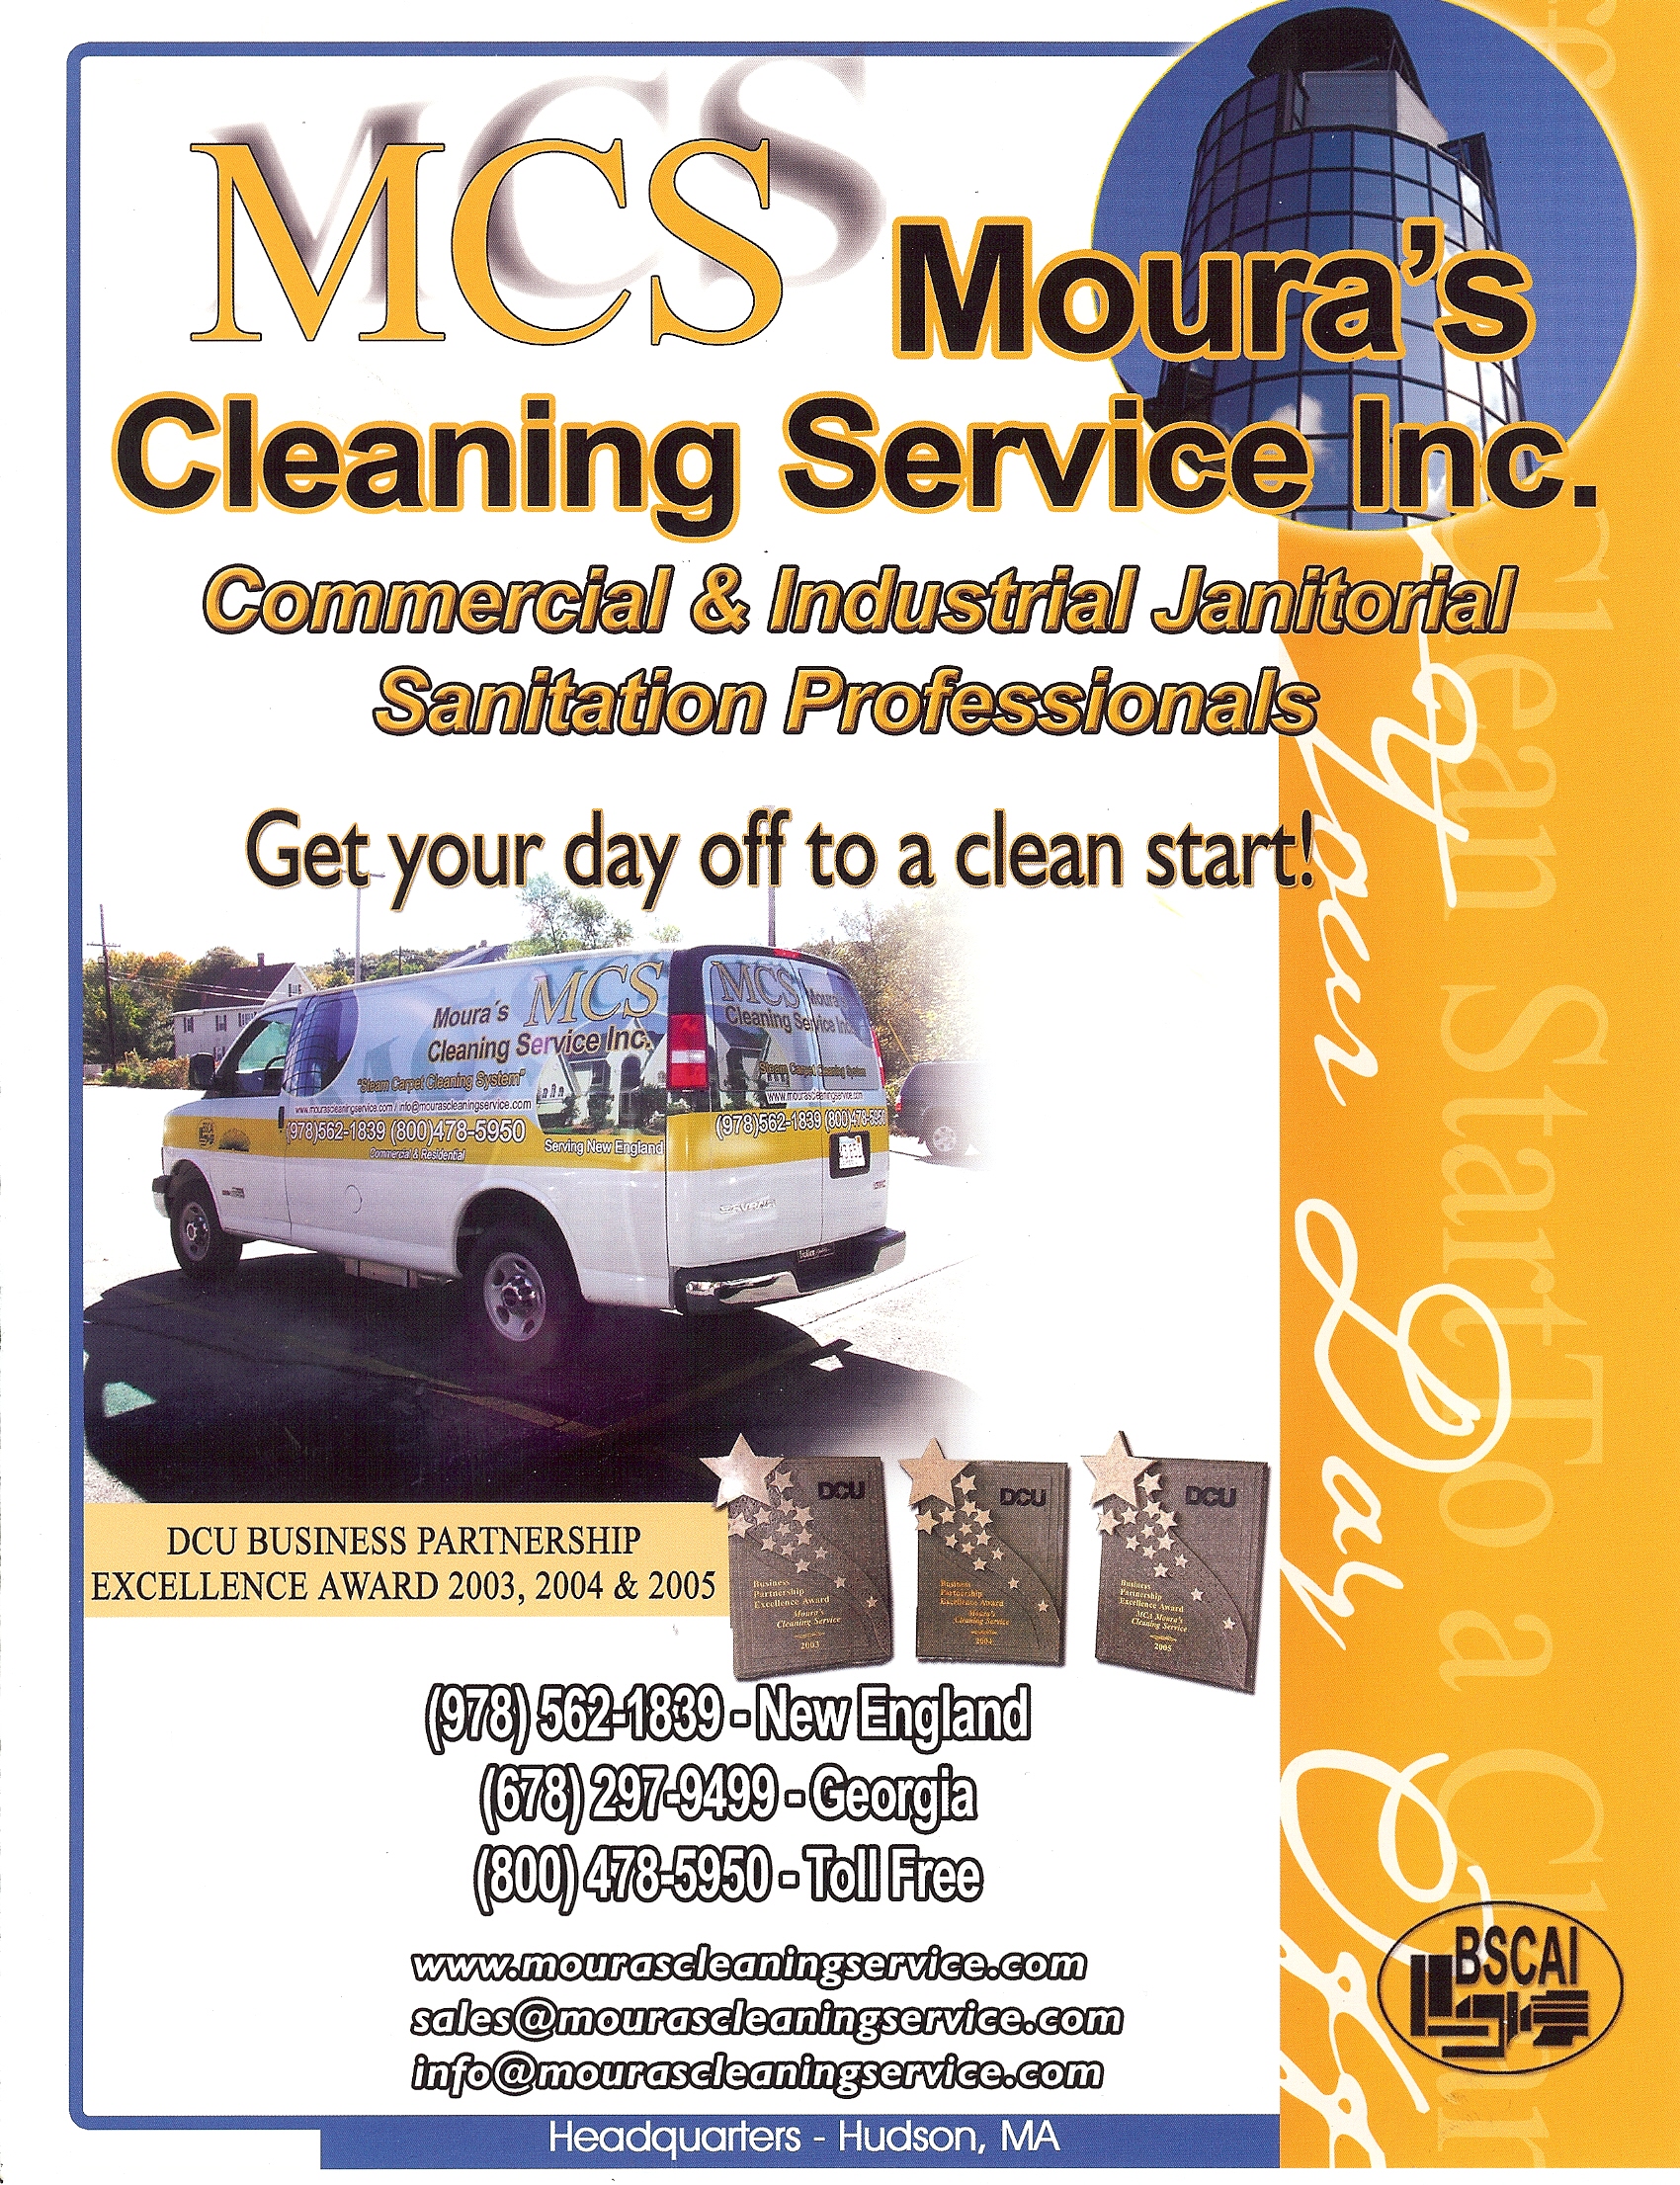 Moura's Cleaning Service Inc Photo